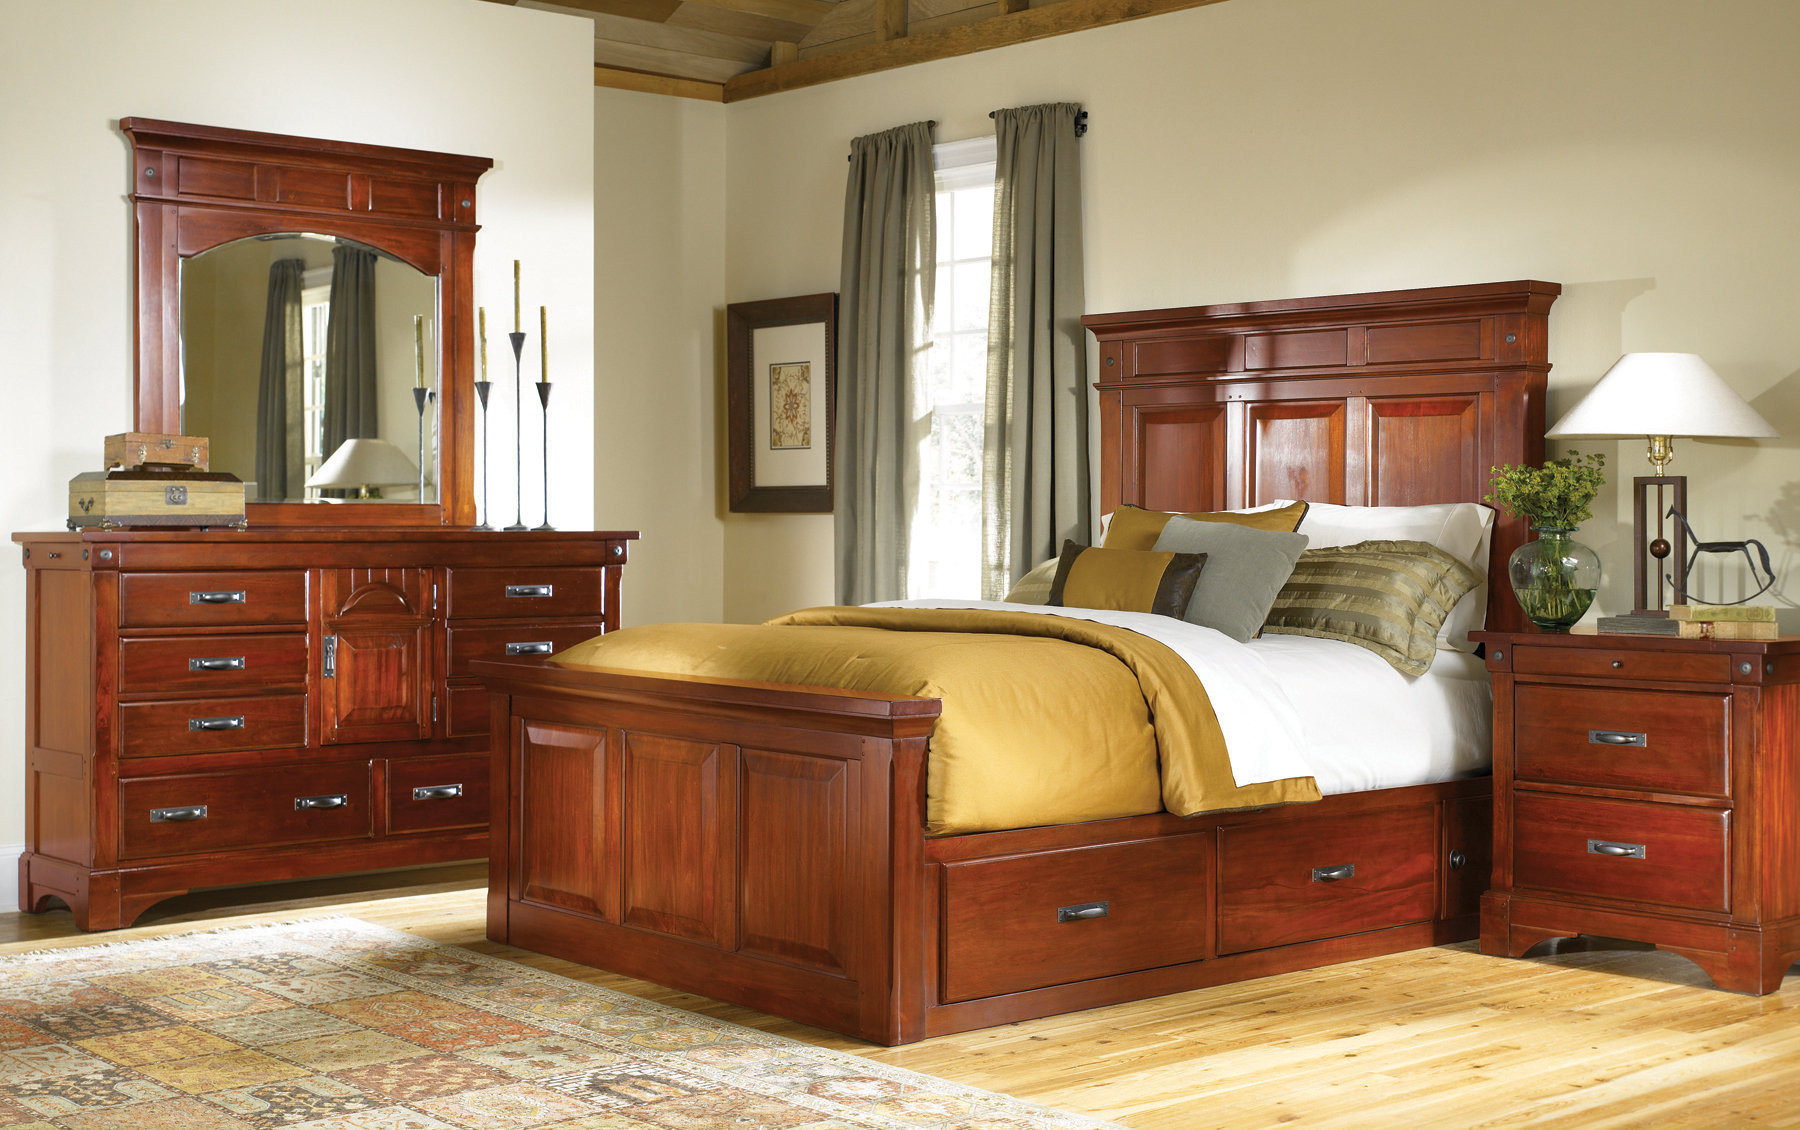 Bedroom Sets With Storage
 Mahogany Storage Bed Classic King and Queen Solid Wood